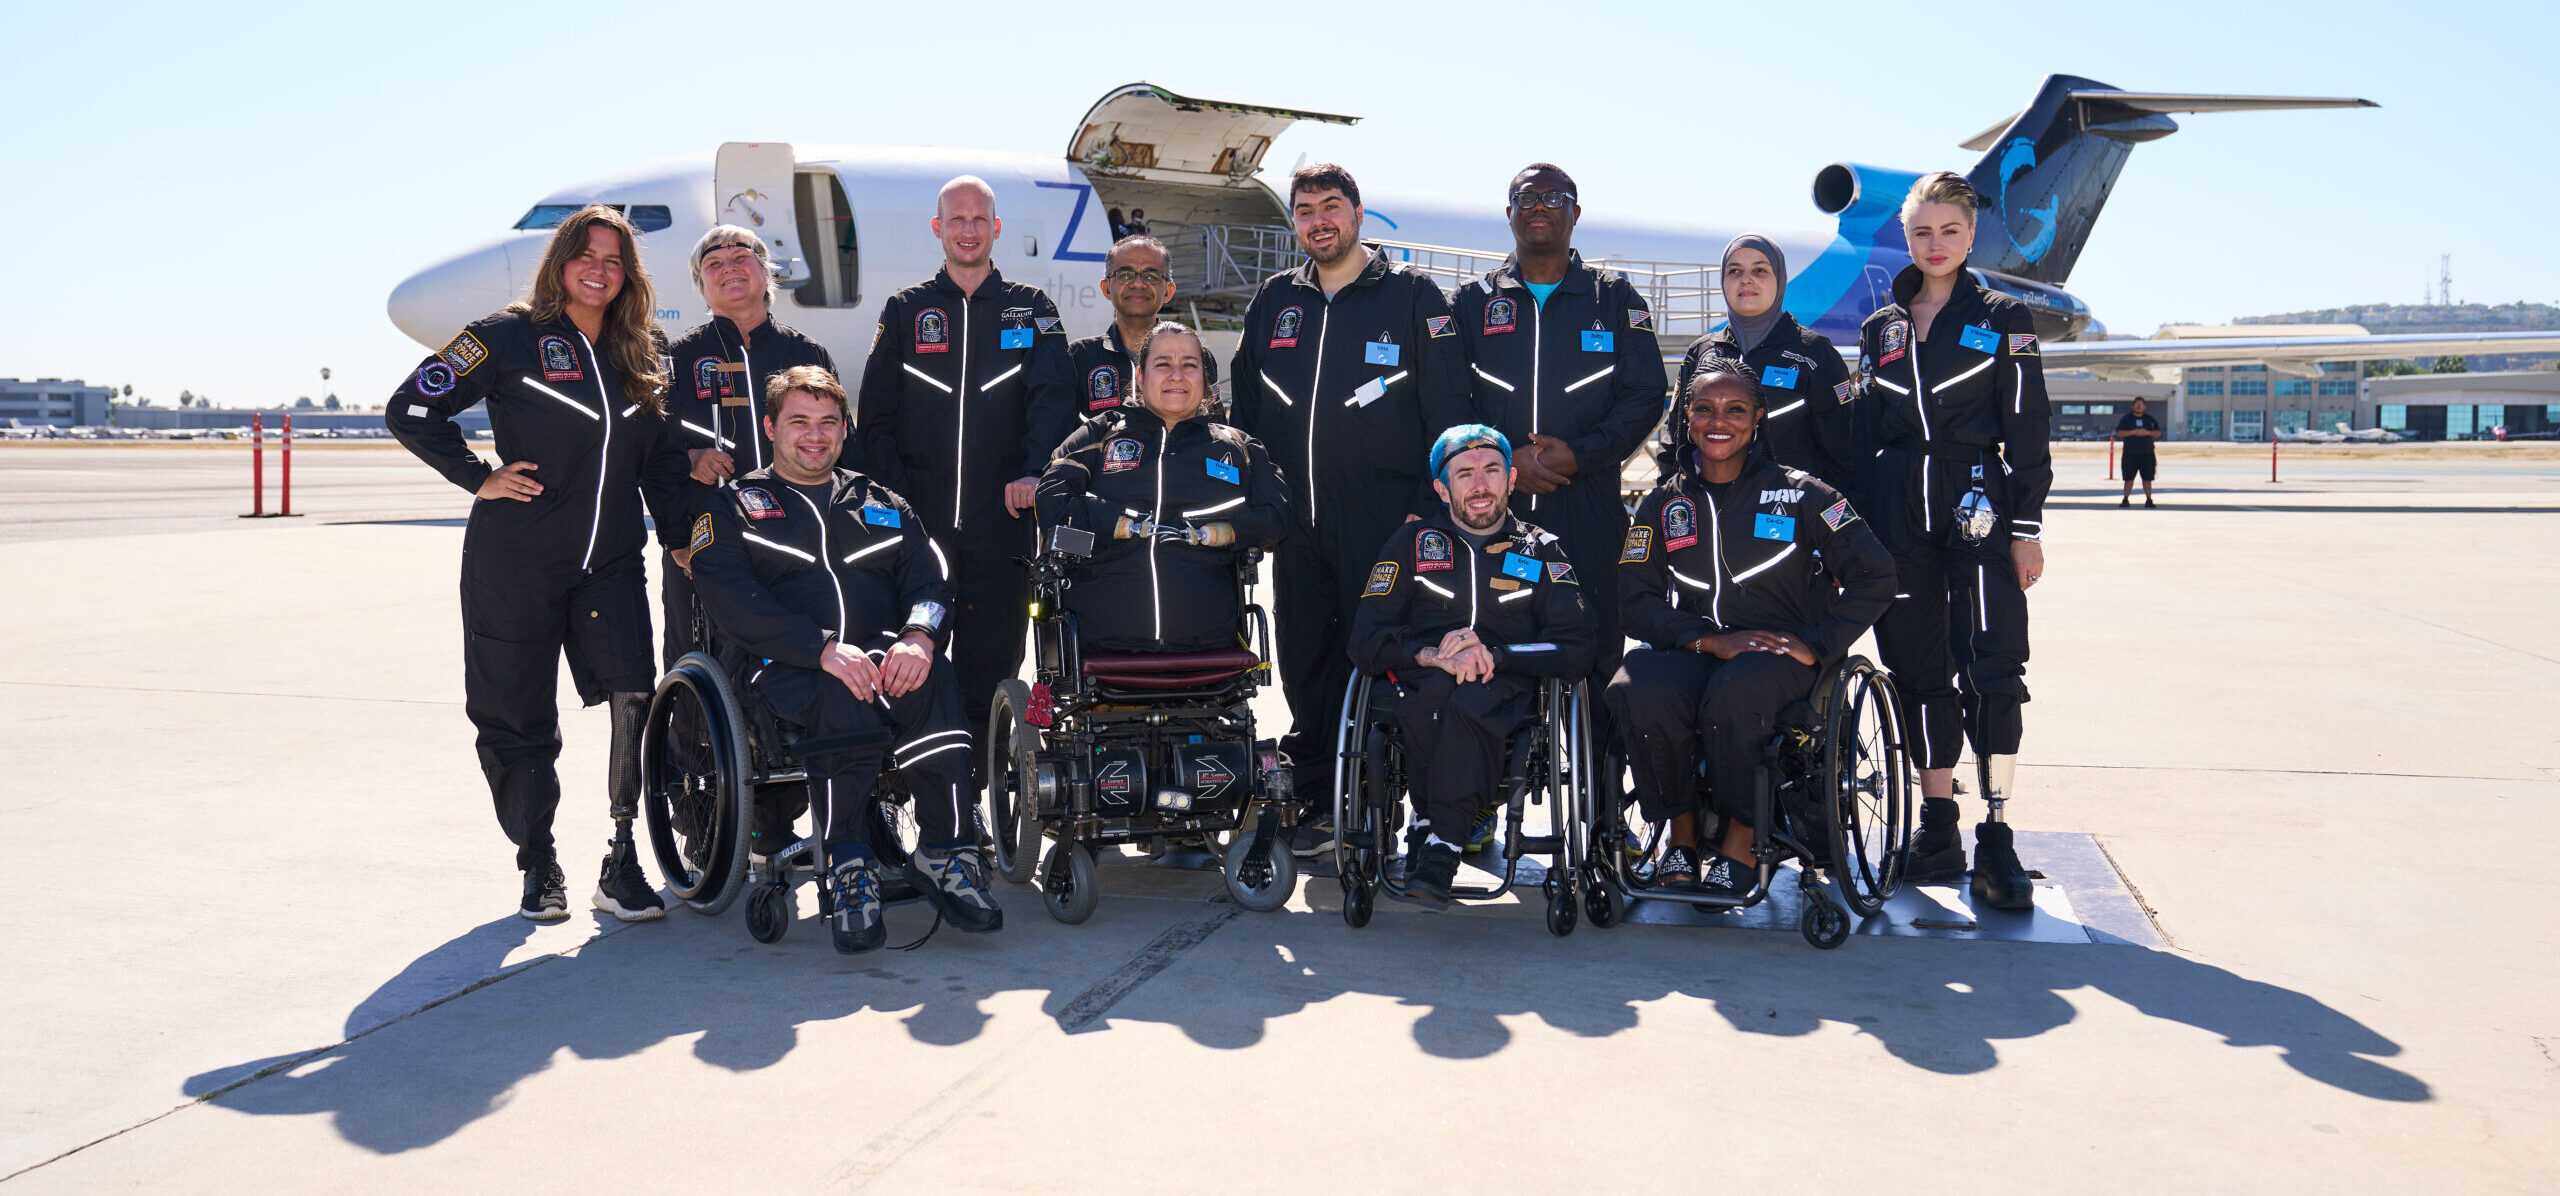 A photo of the twelve astroaccess ambassadors, standing and smiling on a tarmac with the zero-g plane behind them.